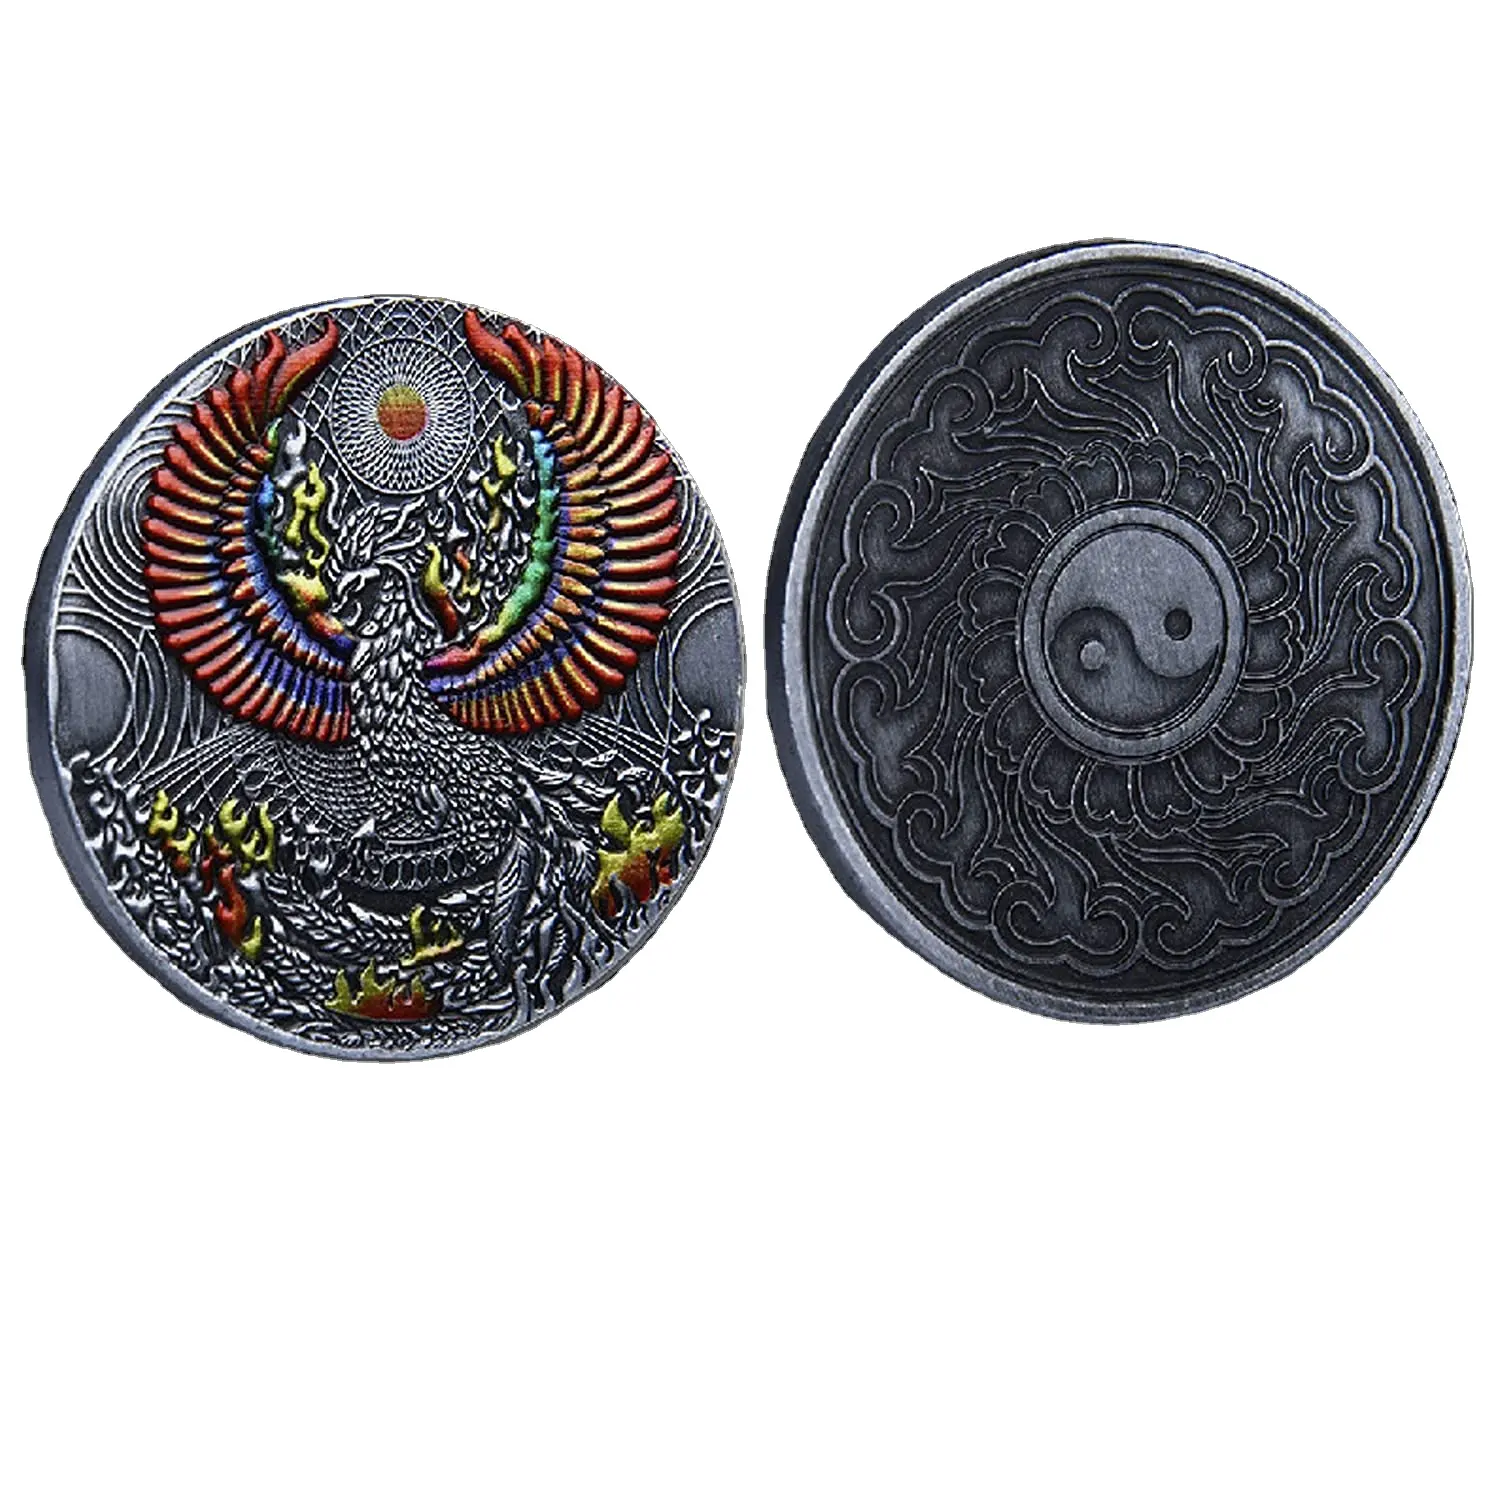 The Ashes Lucky Coin Phoenix Nirvana Tai Chi Challenge Coin Custom Metal commemorative Coin